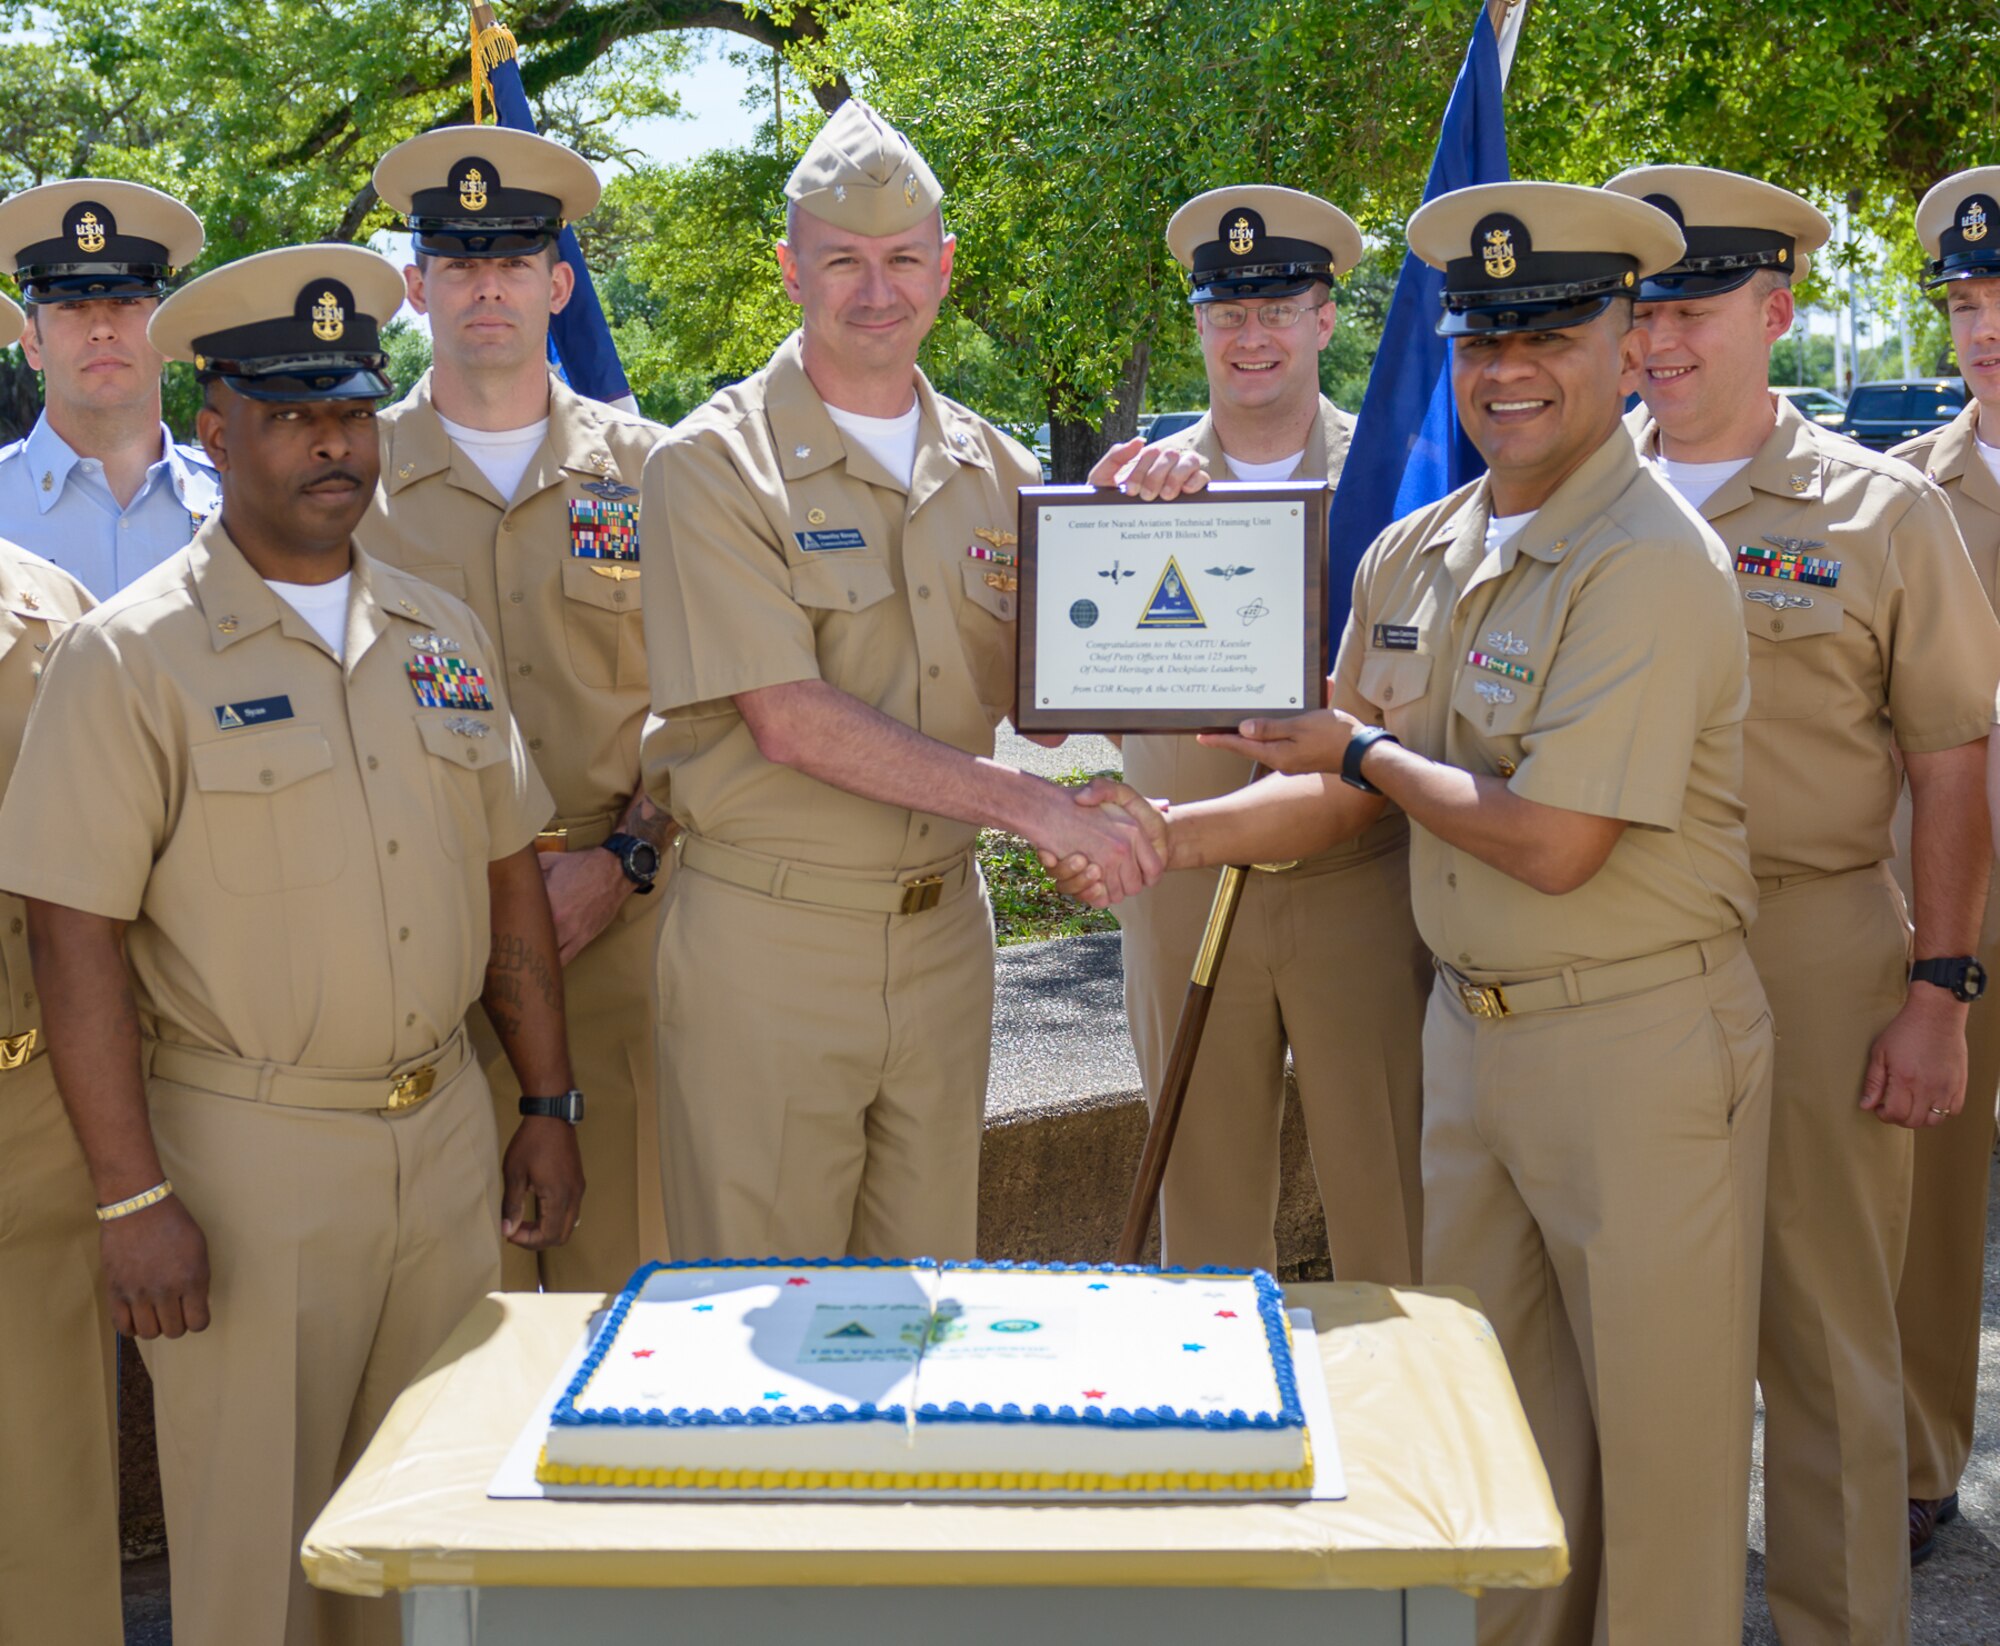 U.S. Navy Cmdr. Timothy Knapp, Center for Naval Aviation Technical Training Unit Keesler commanding officer, presents the Chief’s Mess with a plaque during the CNATTU Keesler’s Chief Petty Officer Birthday Ceremony at Keesler Air Force Base, Mississippi, April 5, 2018. The U.S. Navy’s Chief Petty Officers are celebrating 125 years of heritage and the naval tradition of Unity, Service and Navigation, which is part of their rate emblem, is symbolized by a fouled anchor with the letters “USN” centered on the anchor. (U.S. Air Force photo by André Askew)